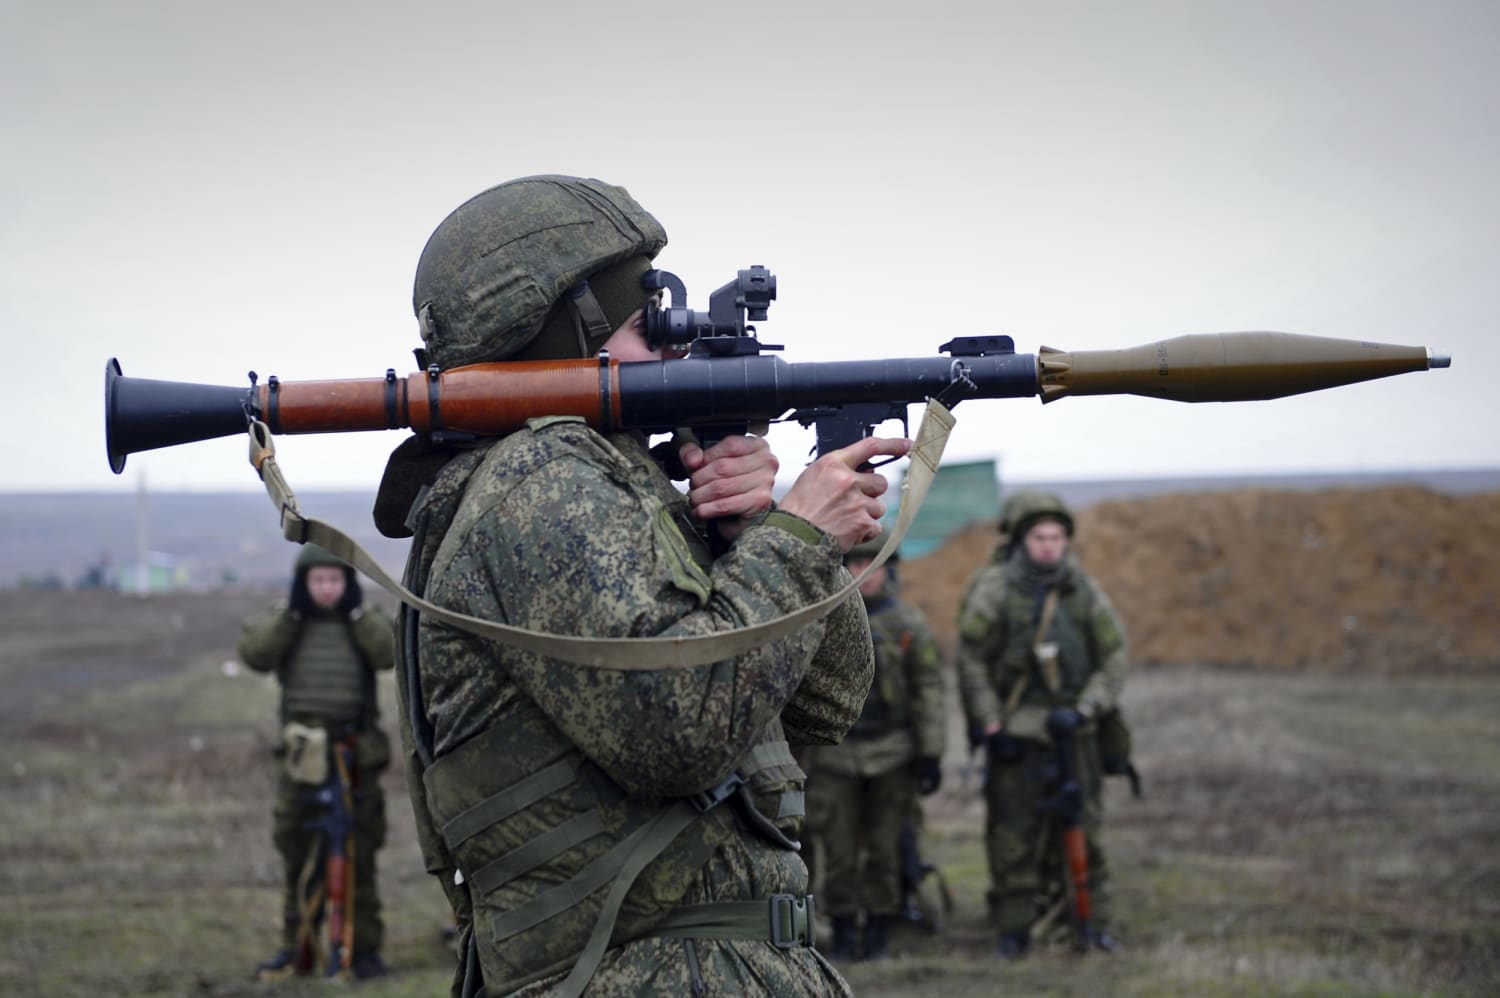 Russia might invade Ukraine again. This time, the fallout wouldn’t be contained.